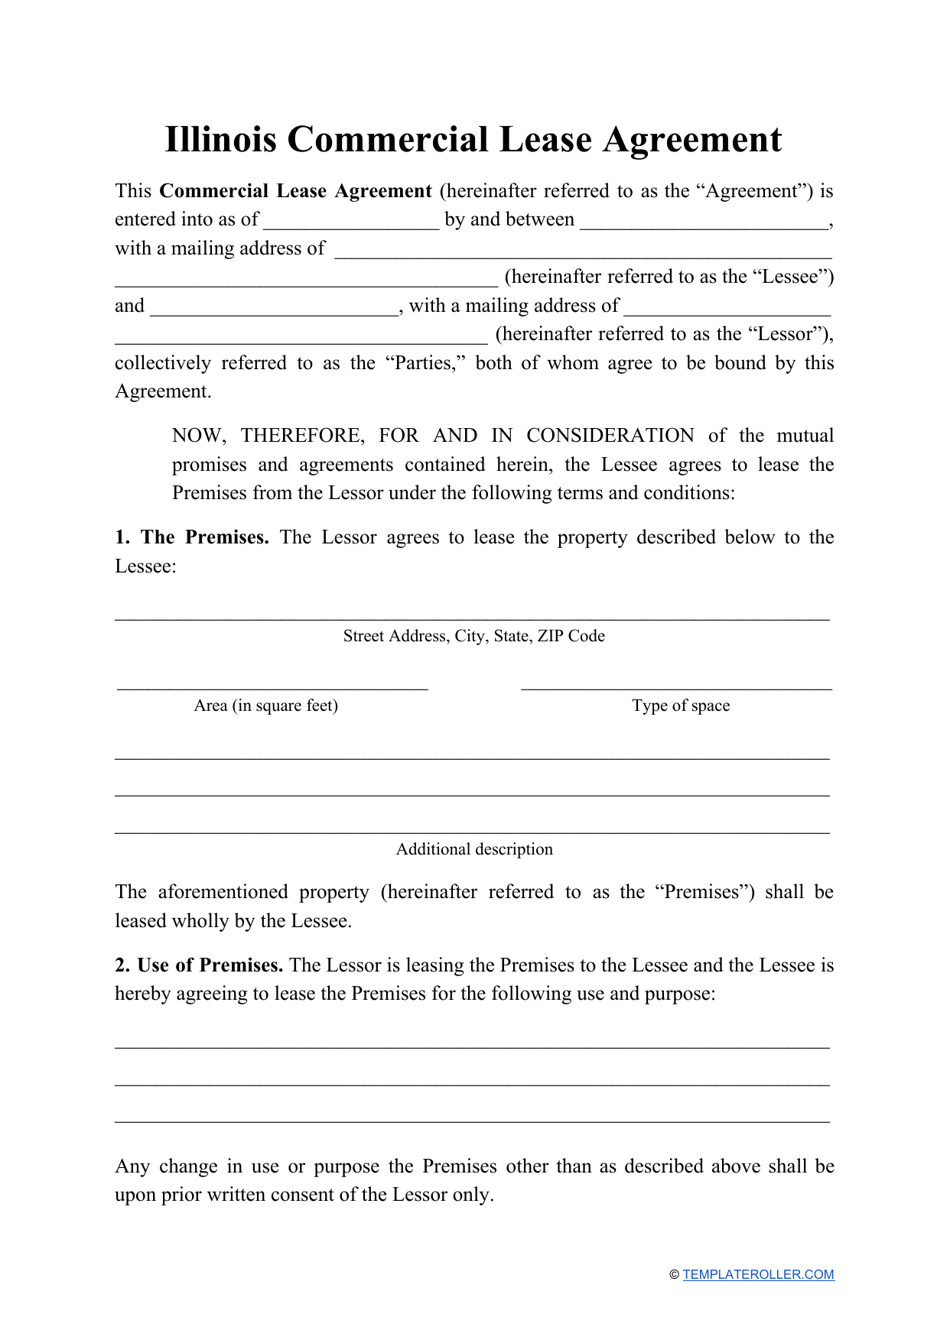 Commercial Lease Agreement Template - Illinois, Page 1